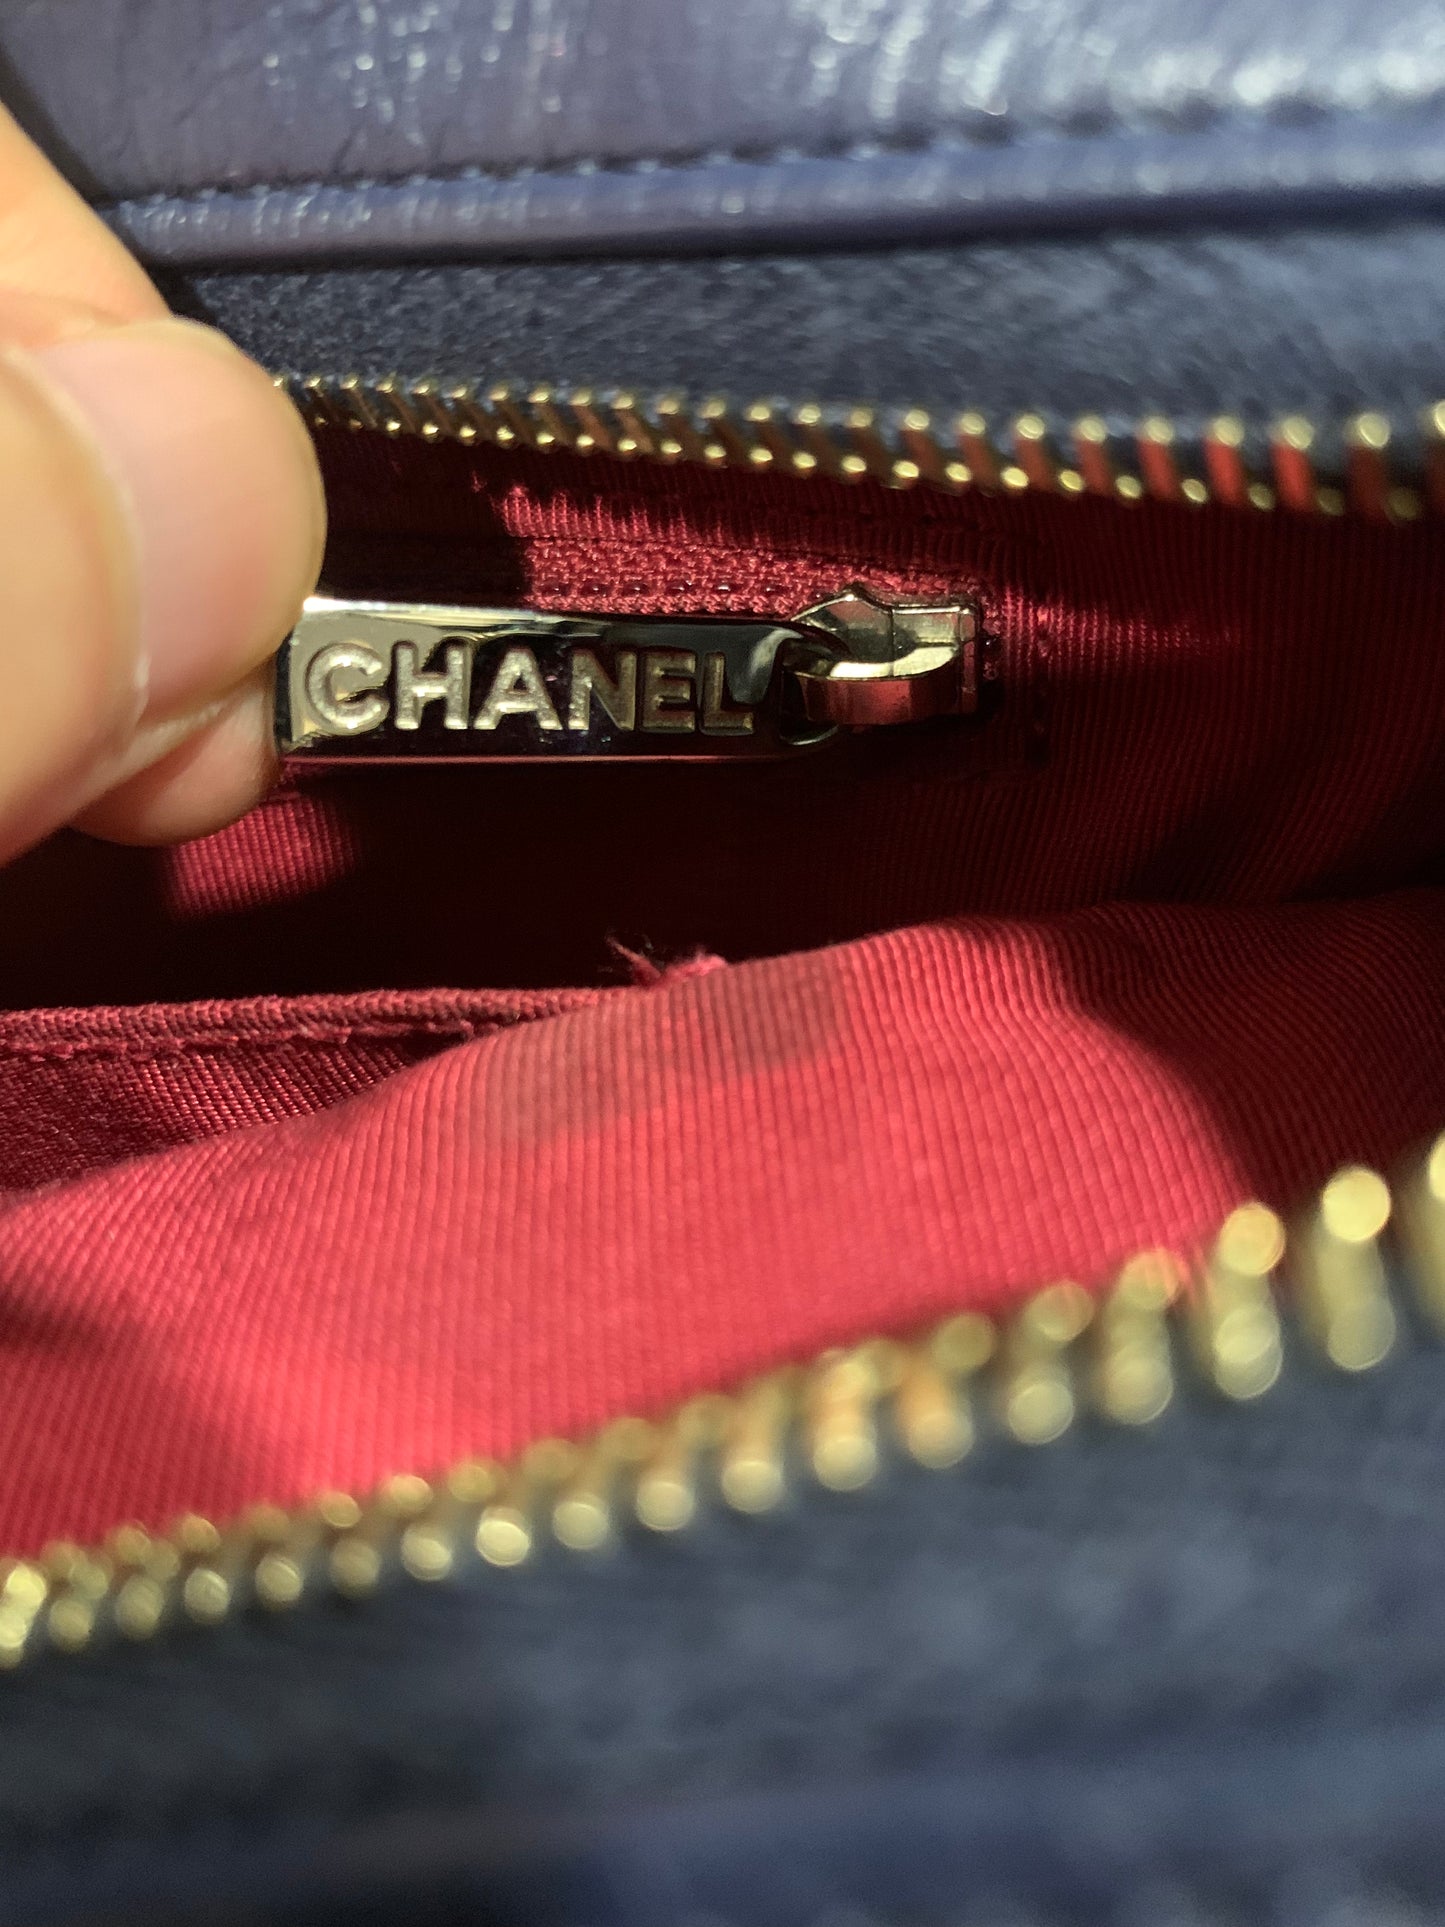 Chanel Gabrielle Large Hobo bag 復古小牛皮流浪包 - STAY PURE